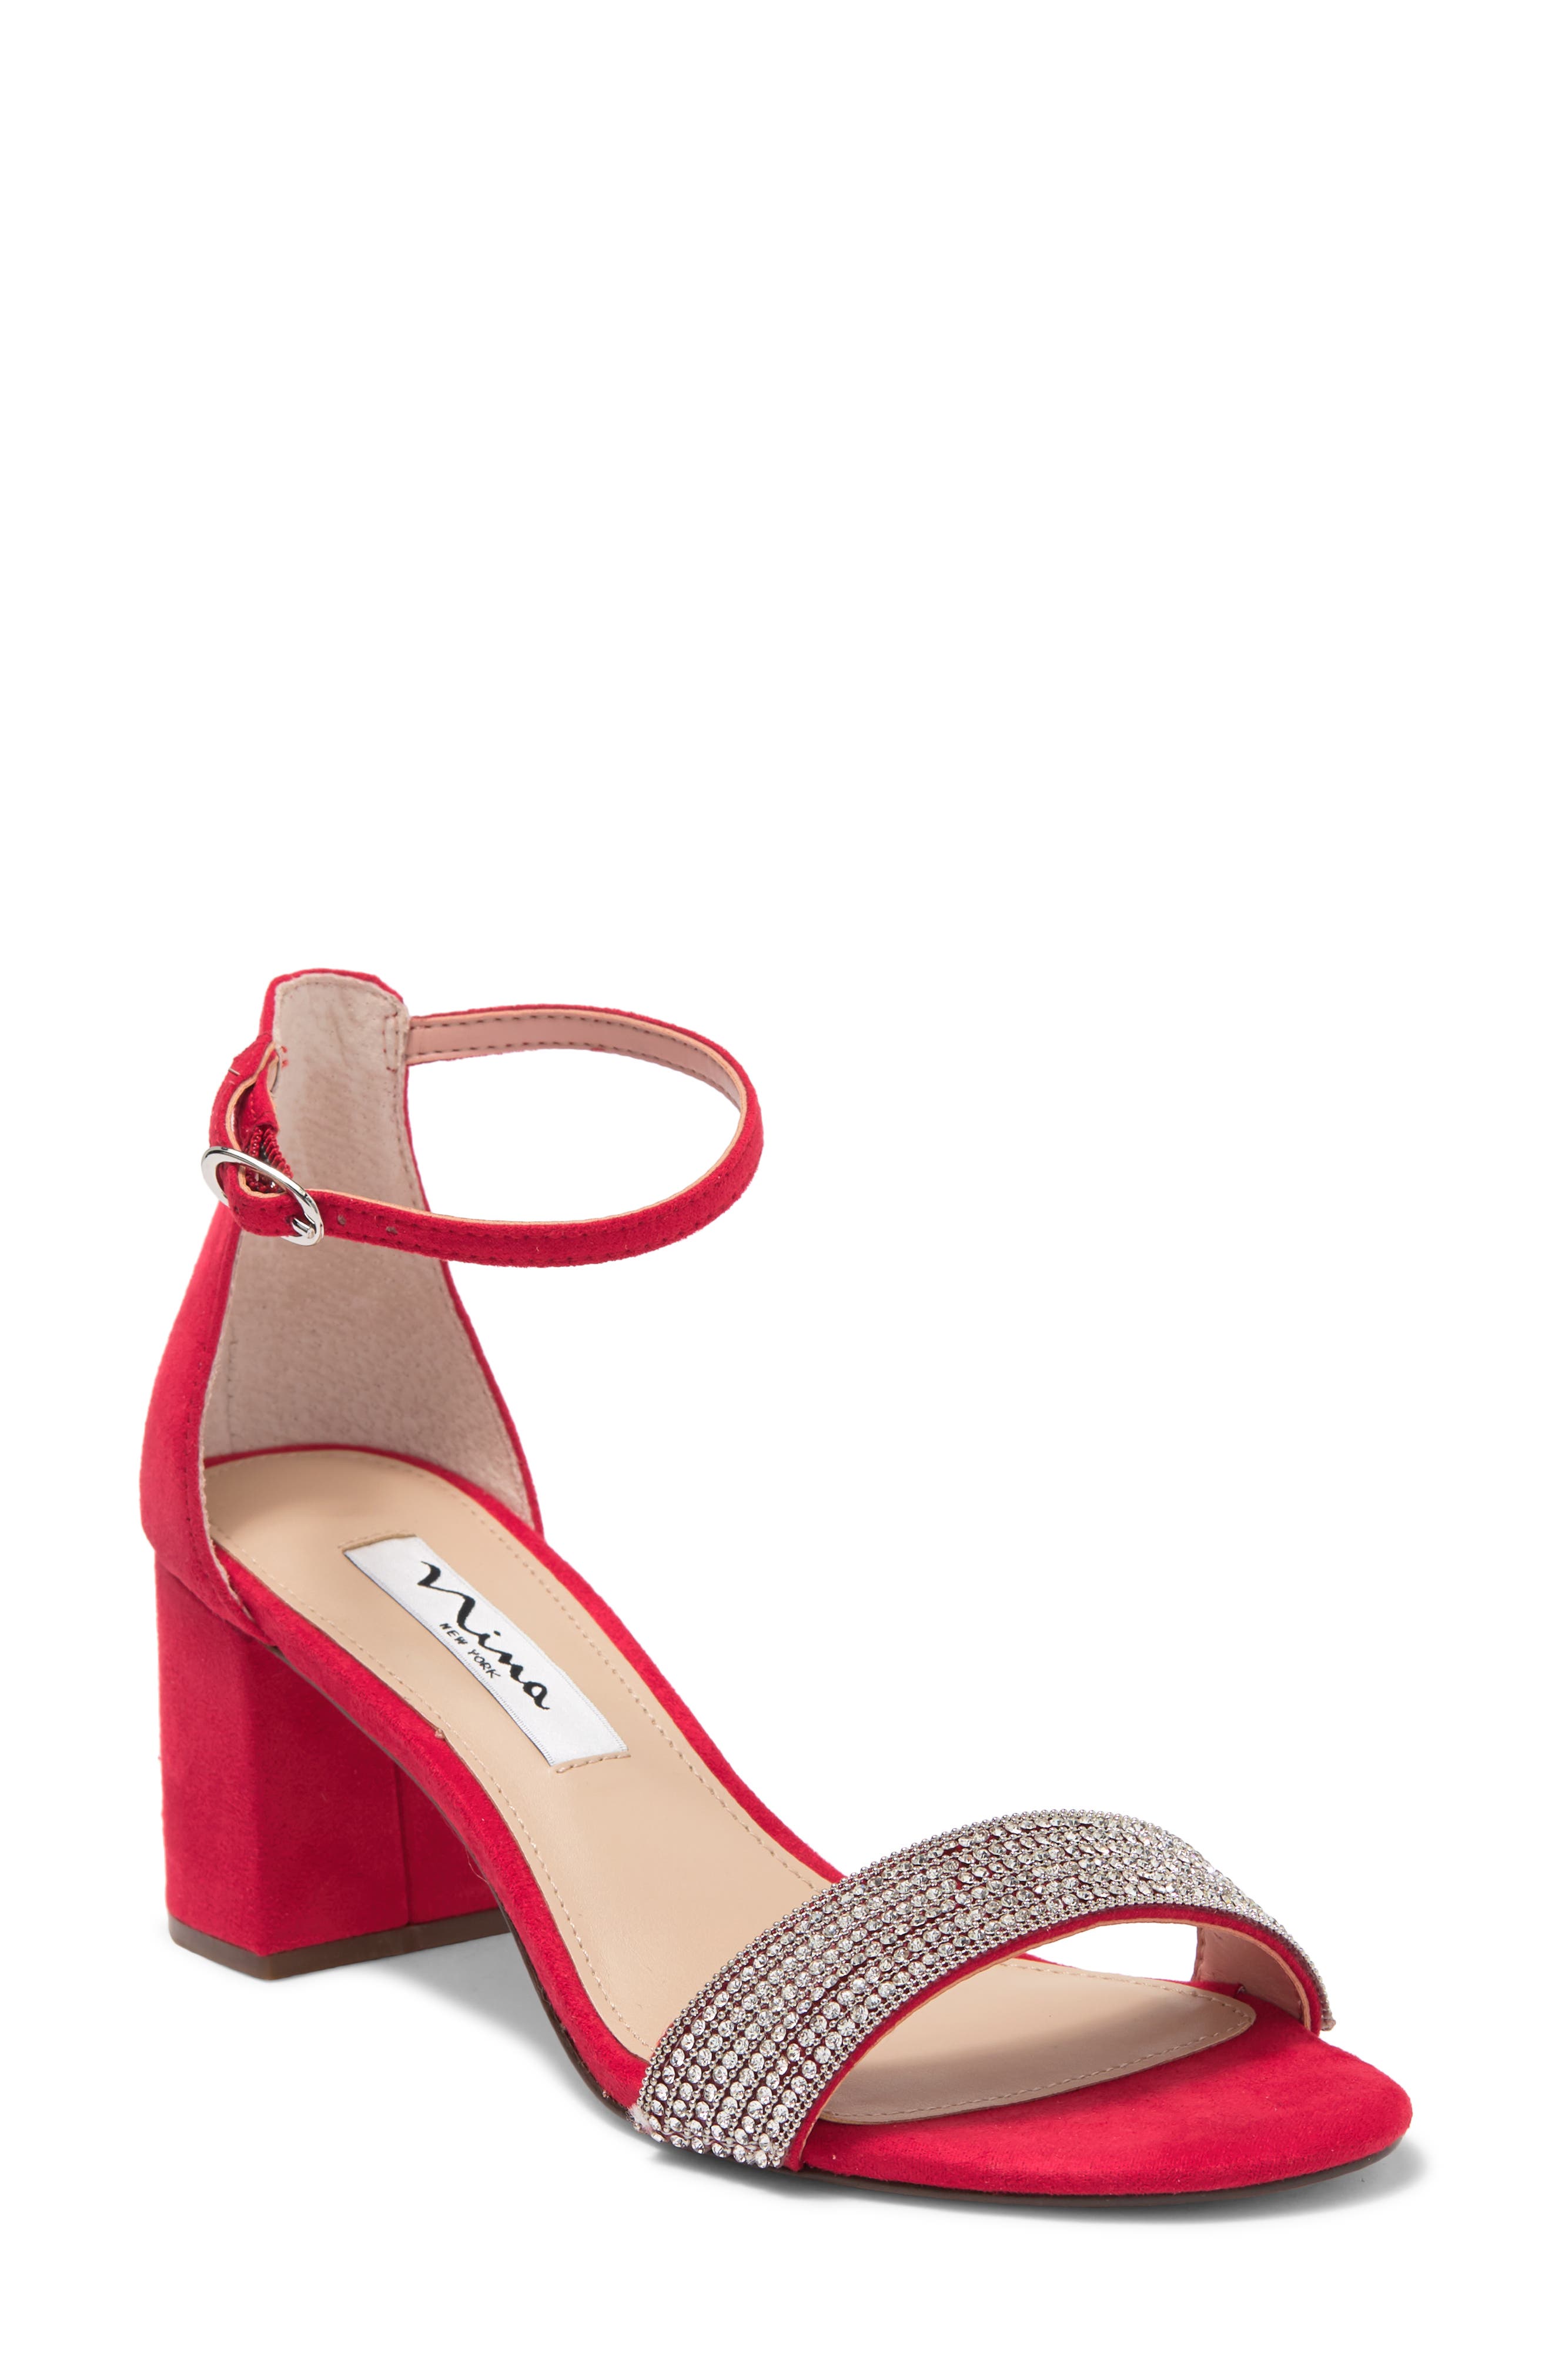 rouge shoes | Nordstrom